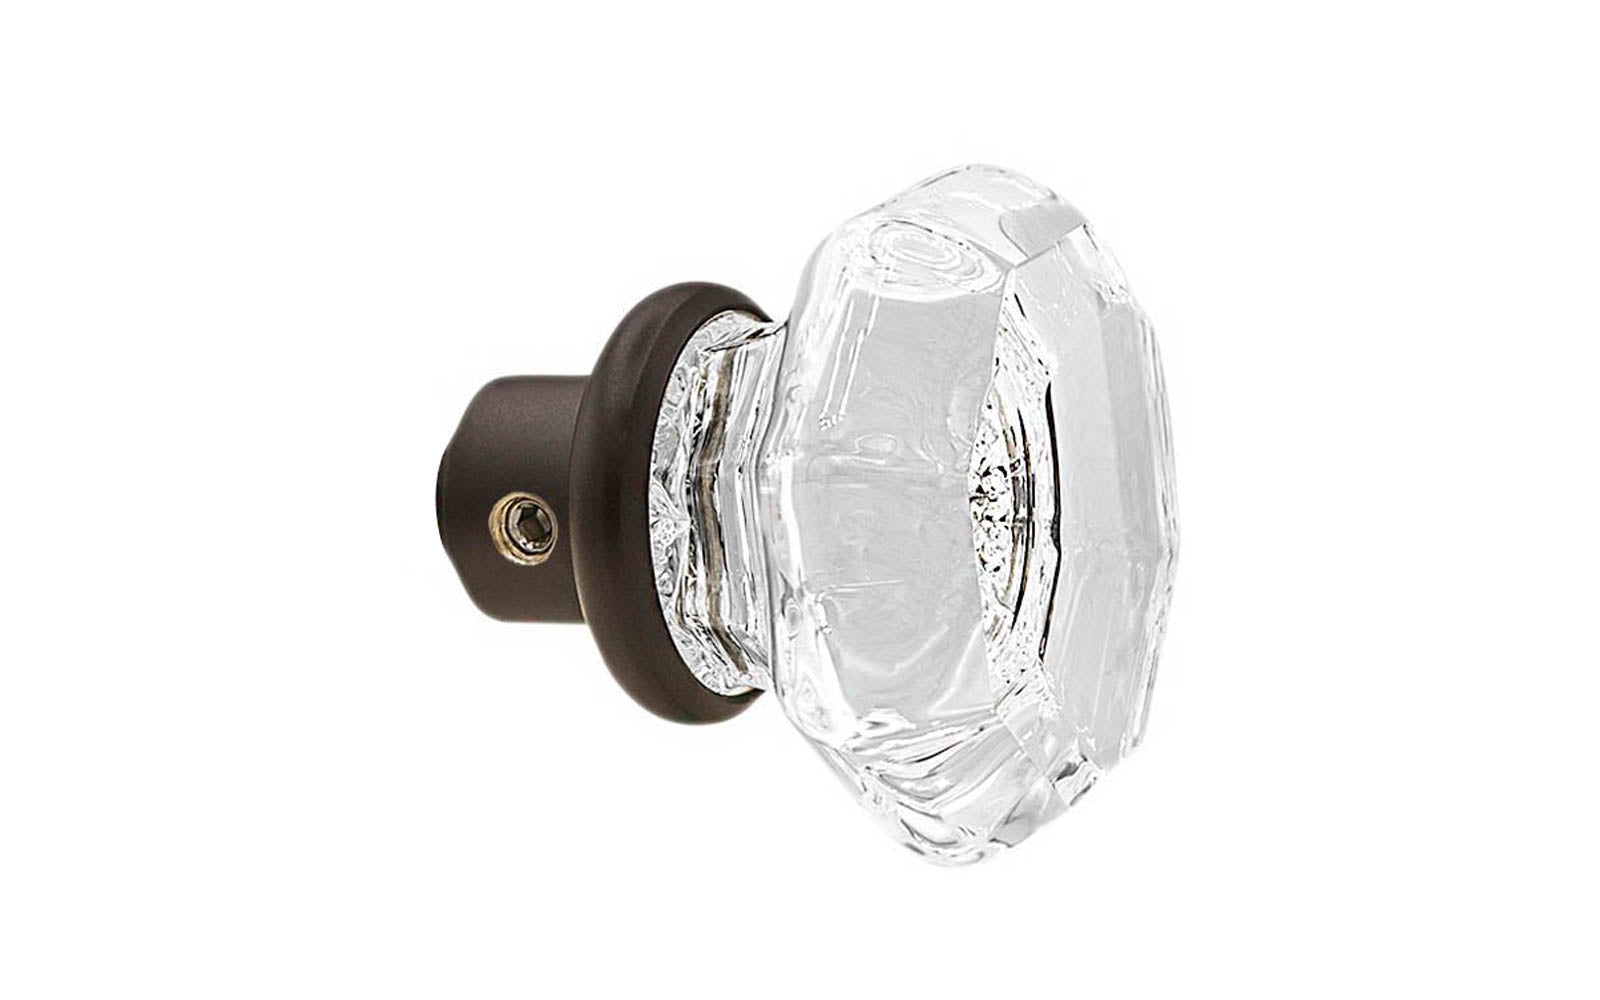 Single Classic Octagonal Clear Glass Doorknob. A high quality & genuine glass doorknob with an attractive Octagon design. The sparkling center point under glass amplifies reflected light to showcase beautiful facets. Solid brass base. Reproduction Glass Door Knobs. Traditional Octagonal Glass Knobs. One knob. Oil Rubbed Bronze.